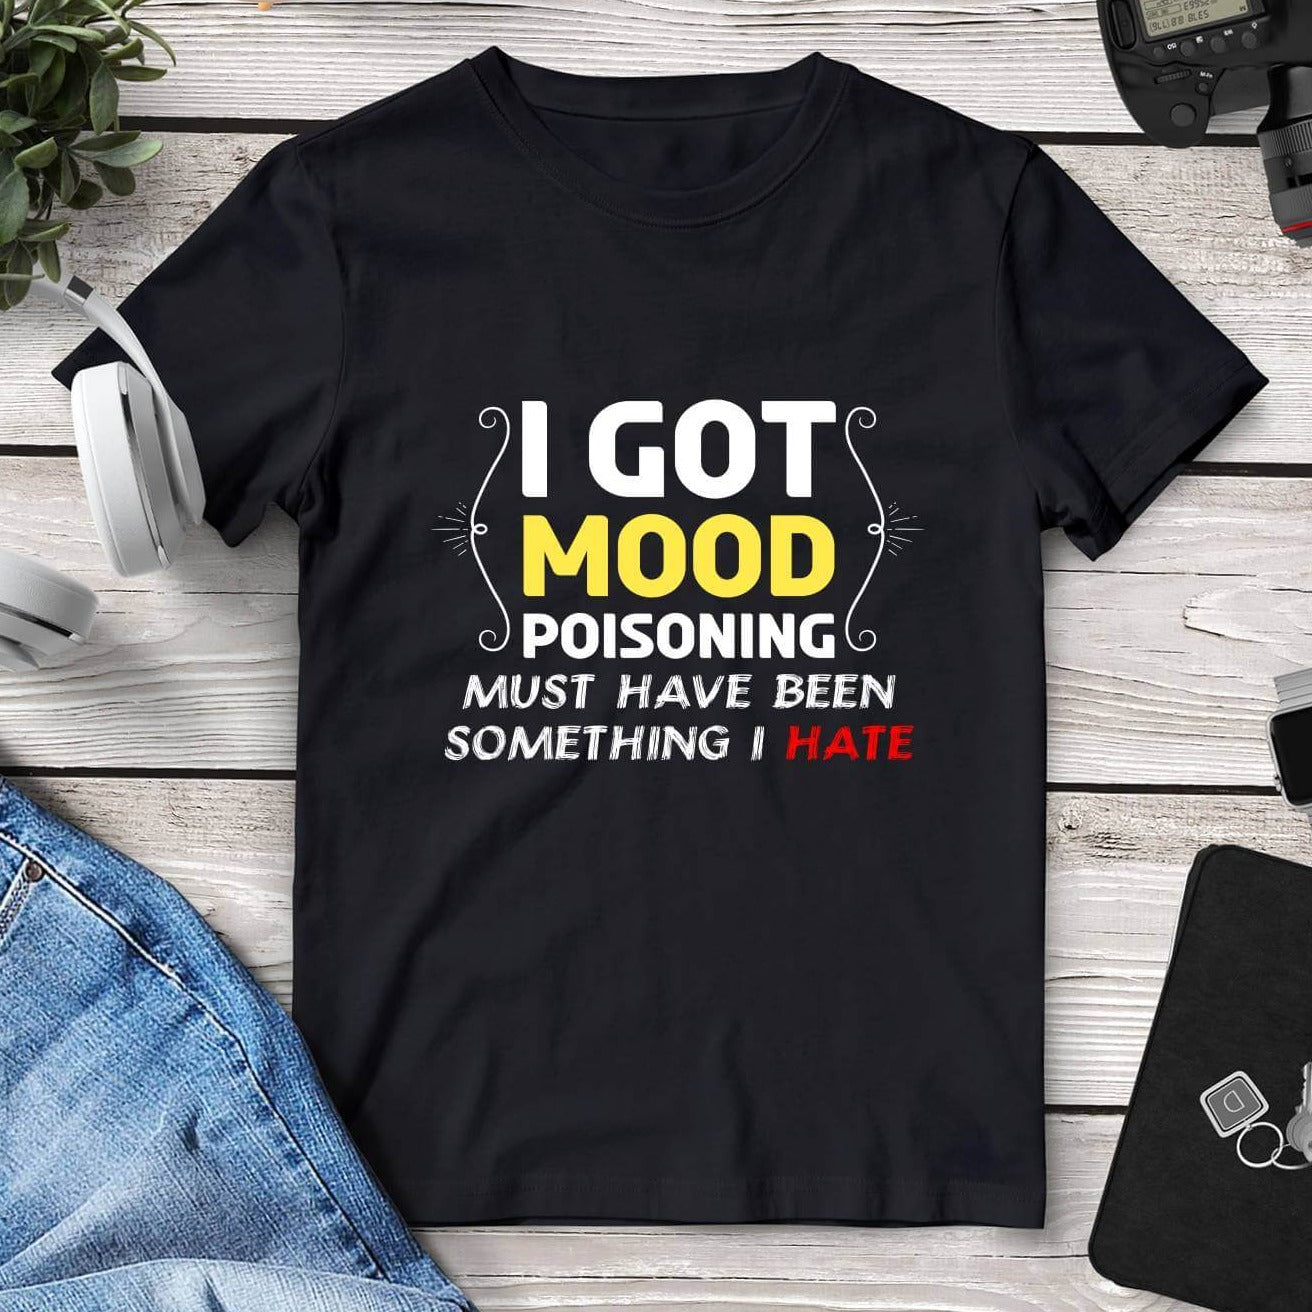 I Got Mood Poisoning Must Have Been Something I Hate T-Shirt. Shop Shirts & Tops on Mounteen. Worldwide shipping available.